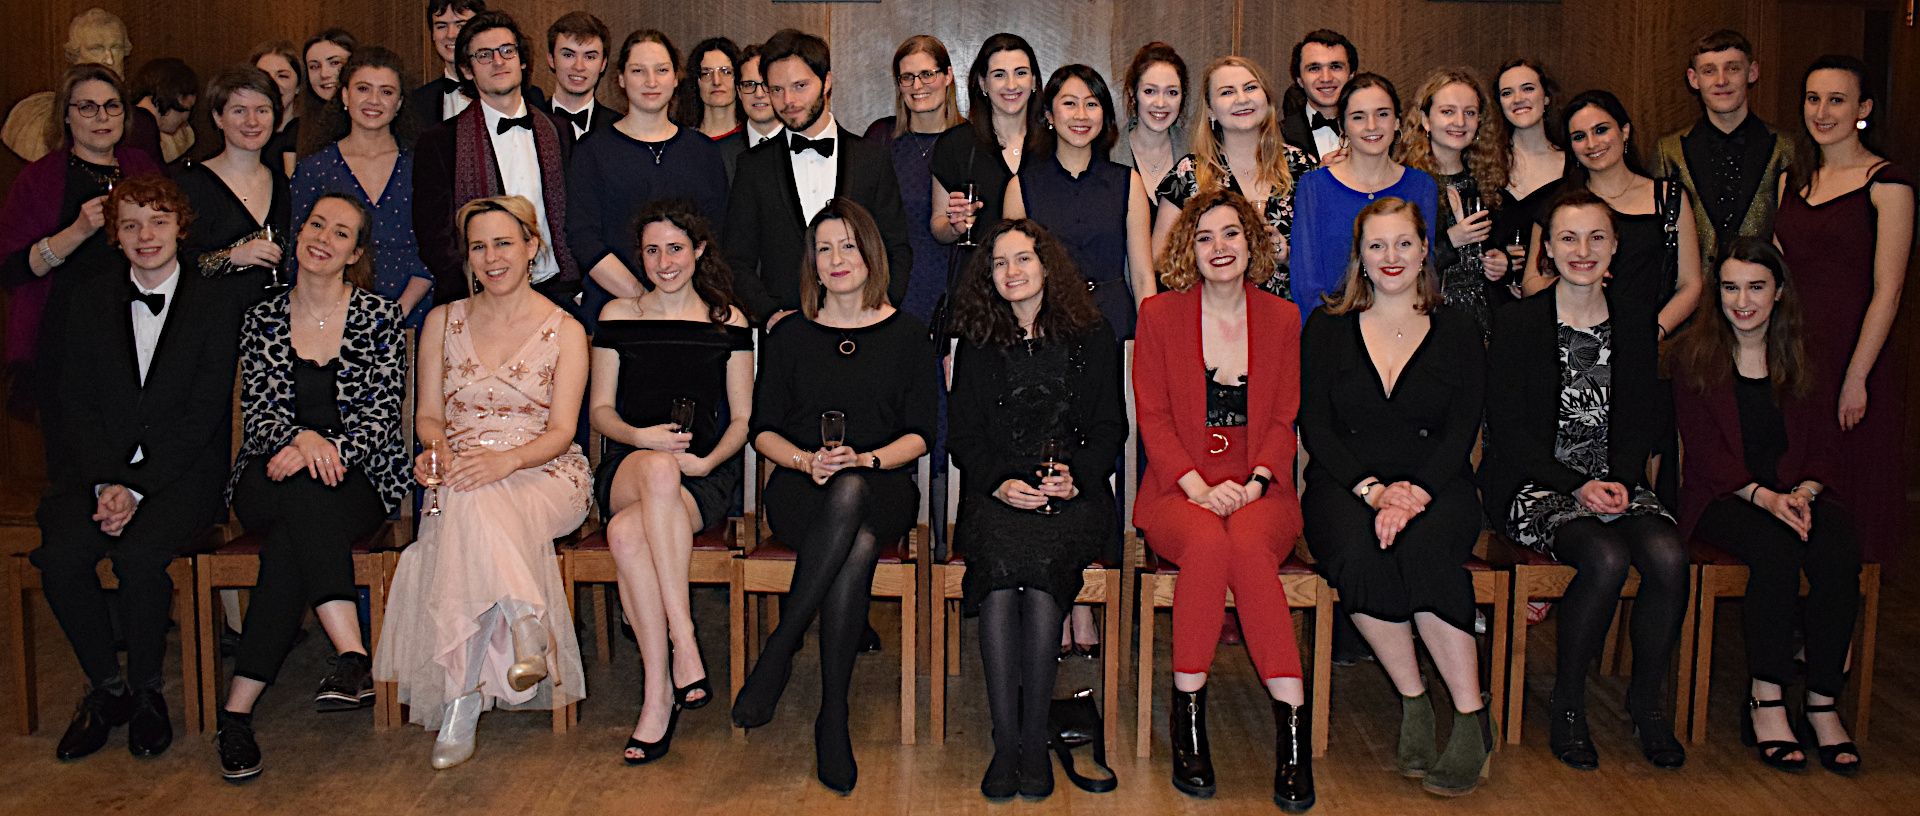 Selwyn languages and linguistics students and Fellows at a college dinner. Photo: Joe Marsden